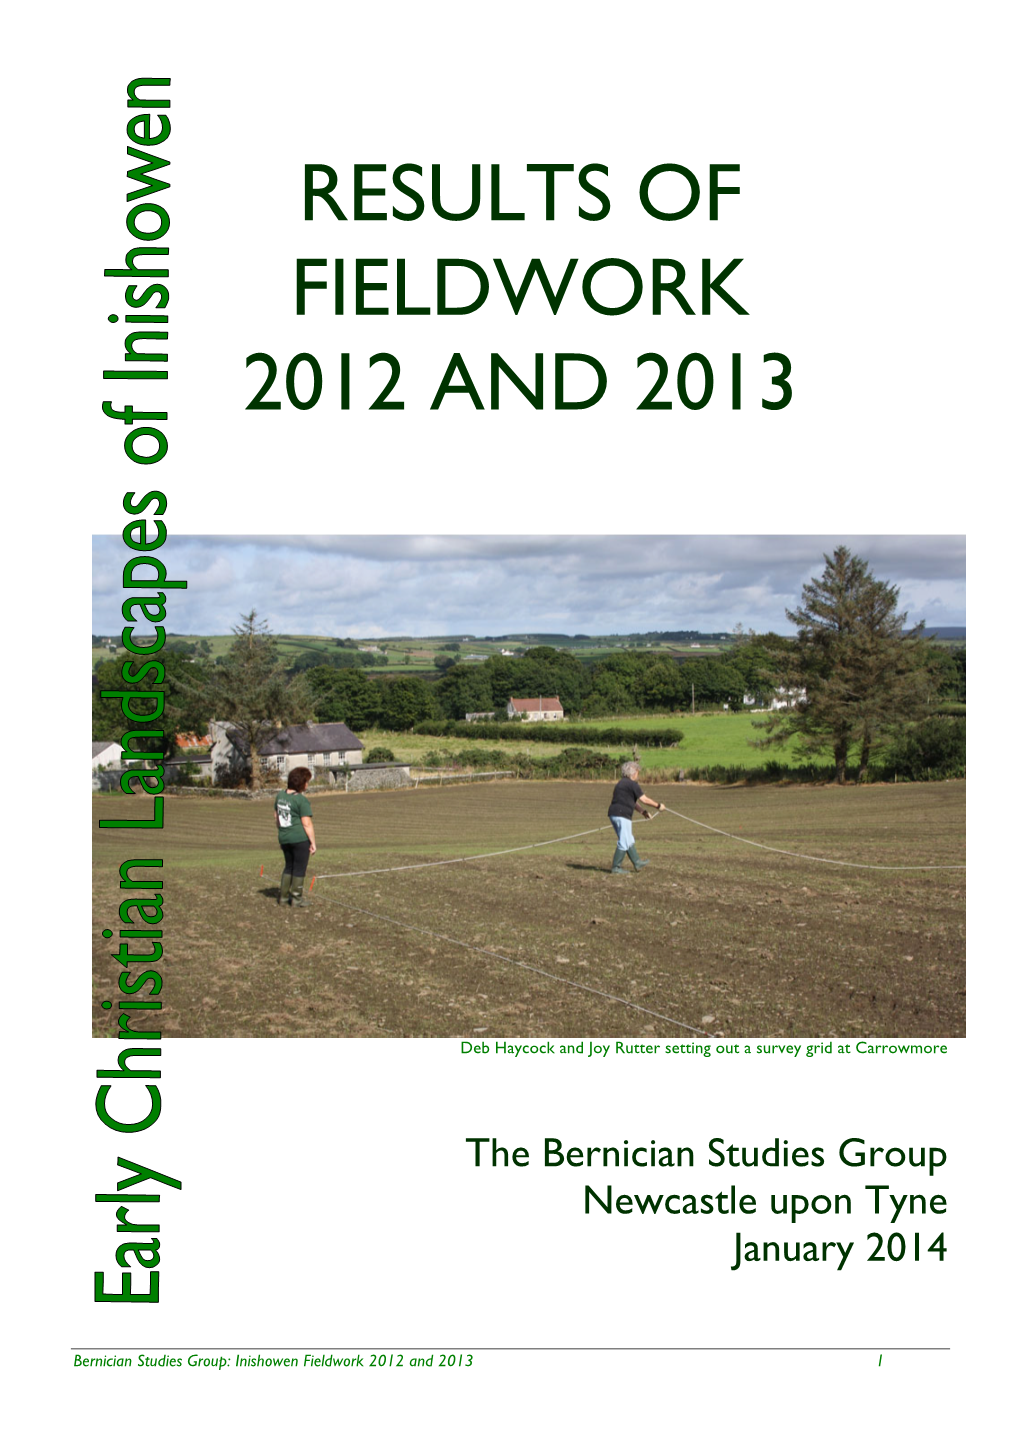 Results of Fieldwork 2012 and 2013